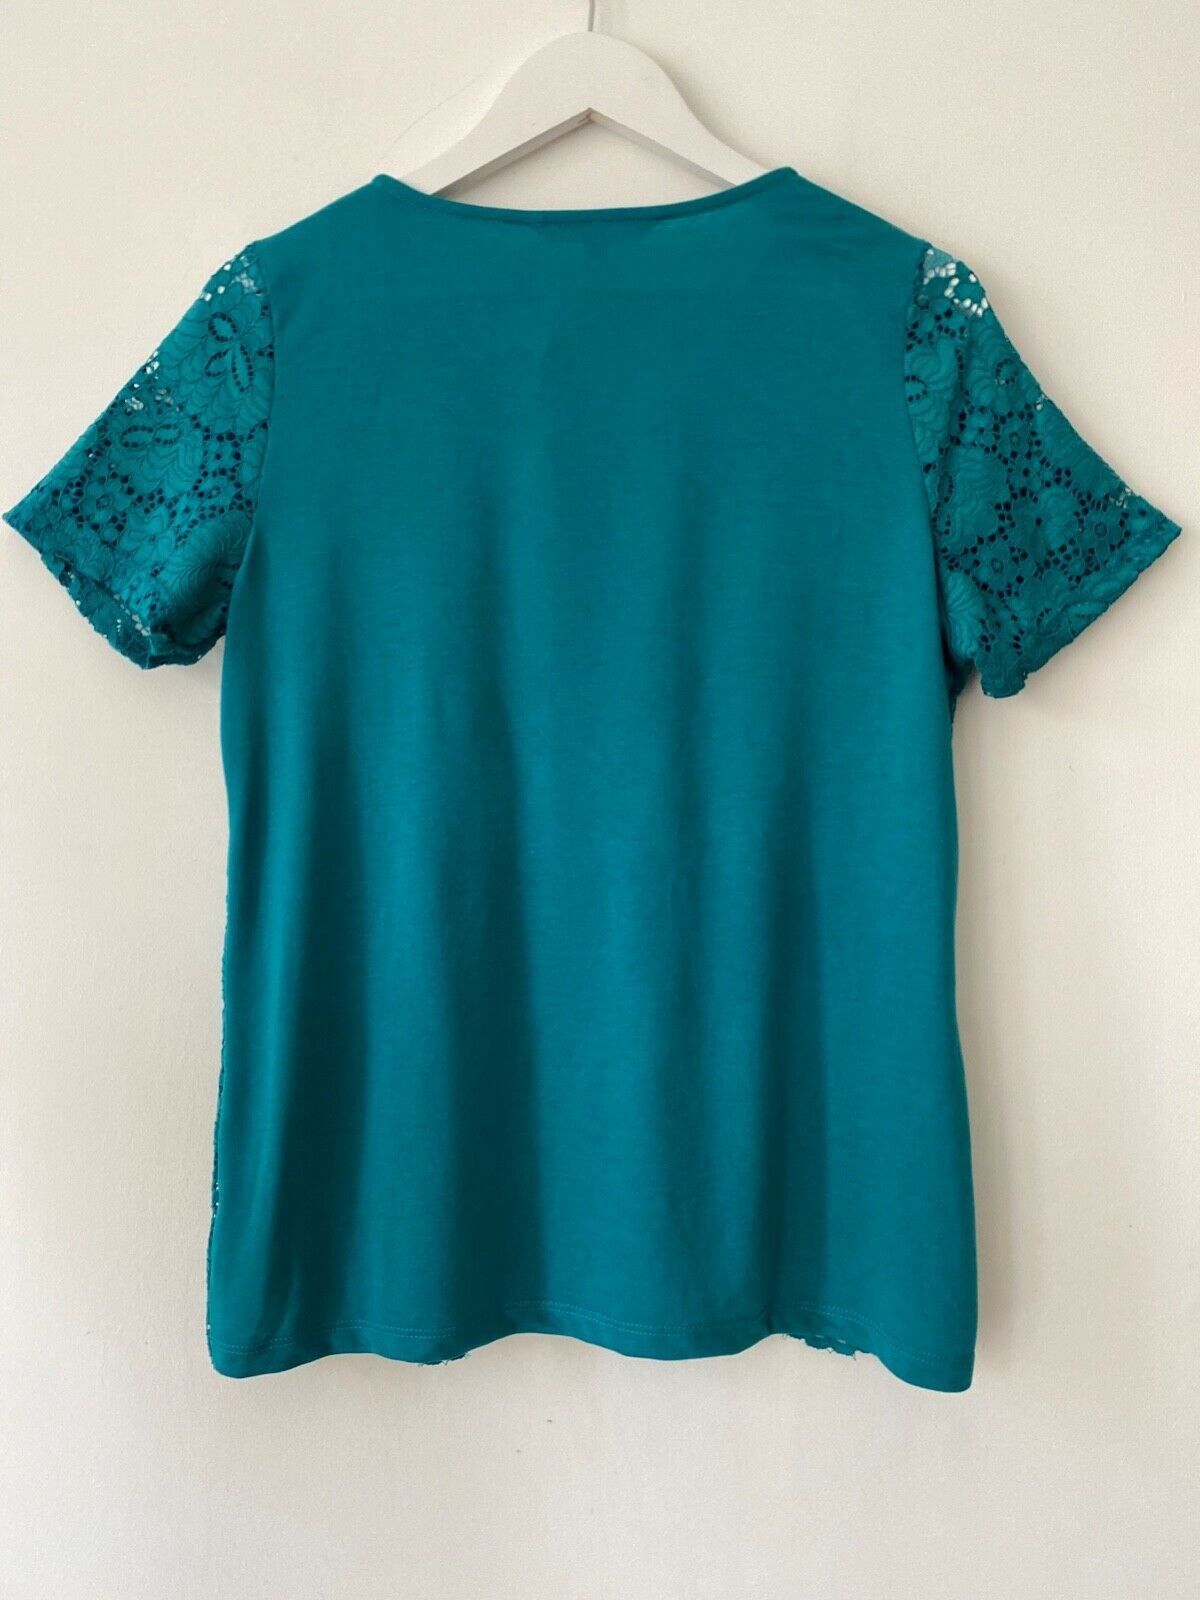 Bonmarche Green Lace Lined T-Shirt Size 12